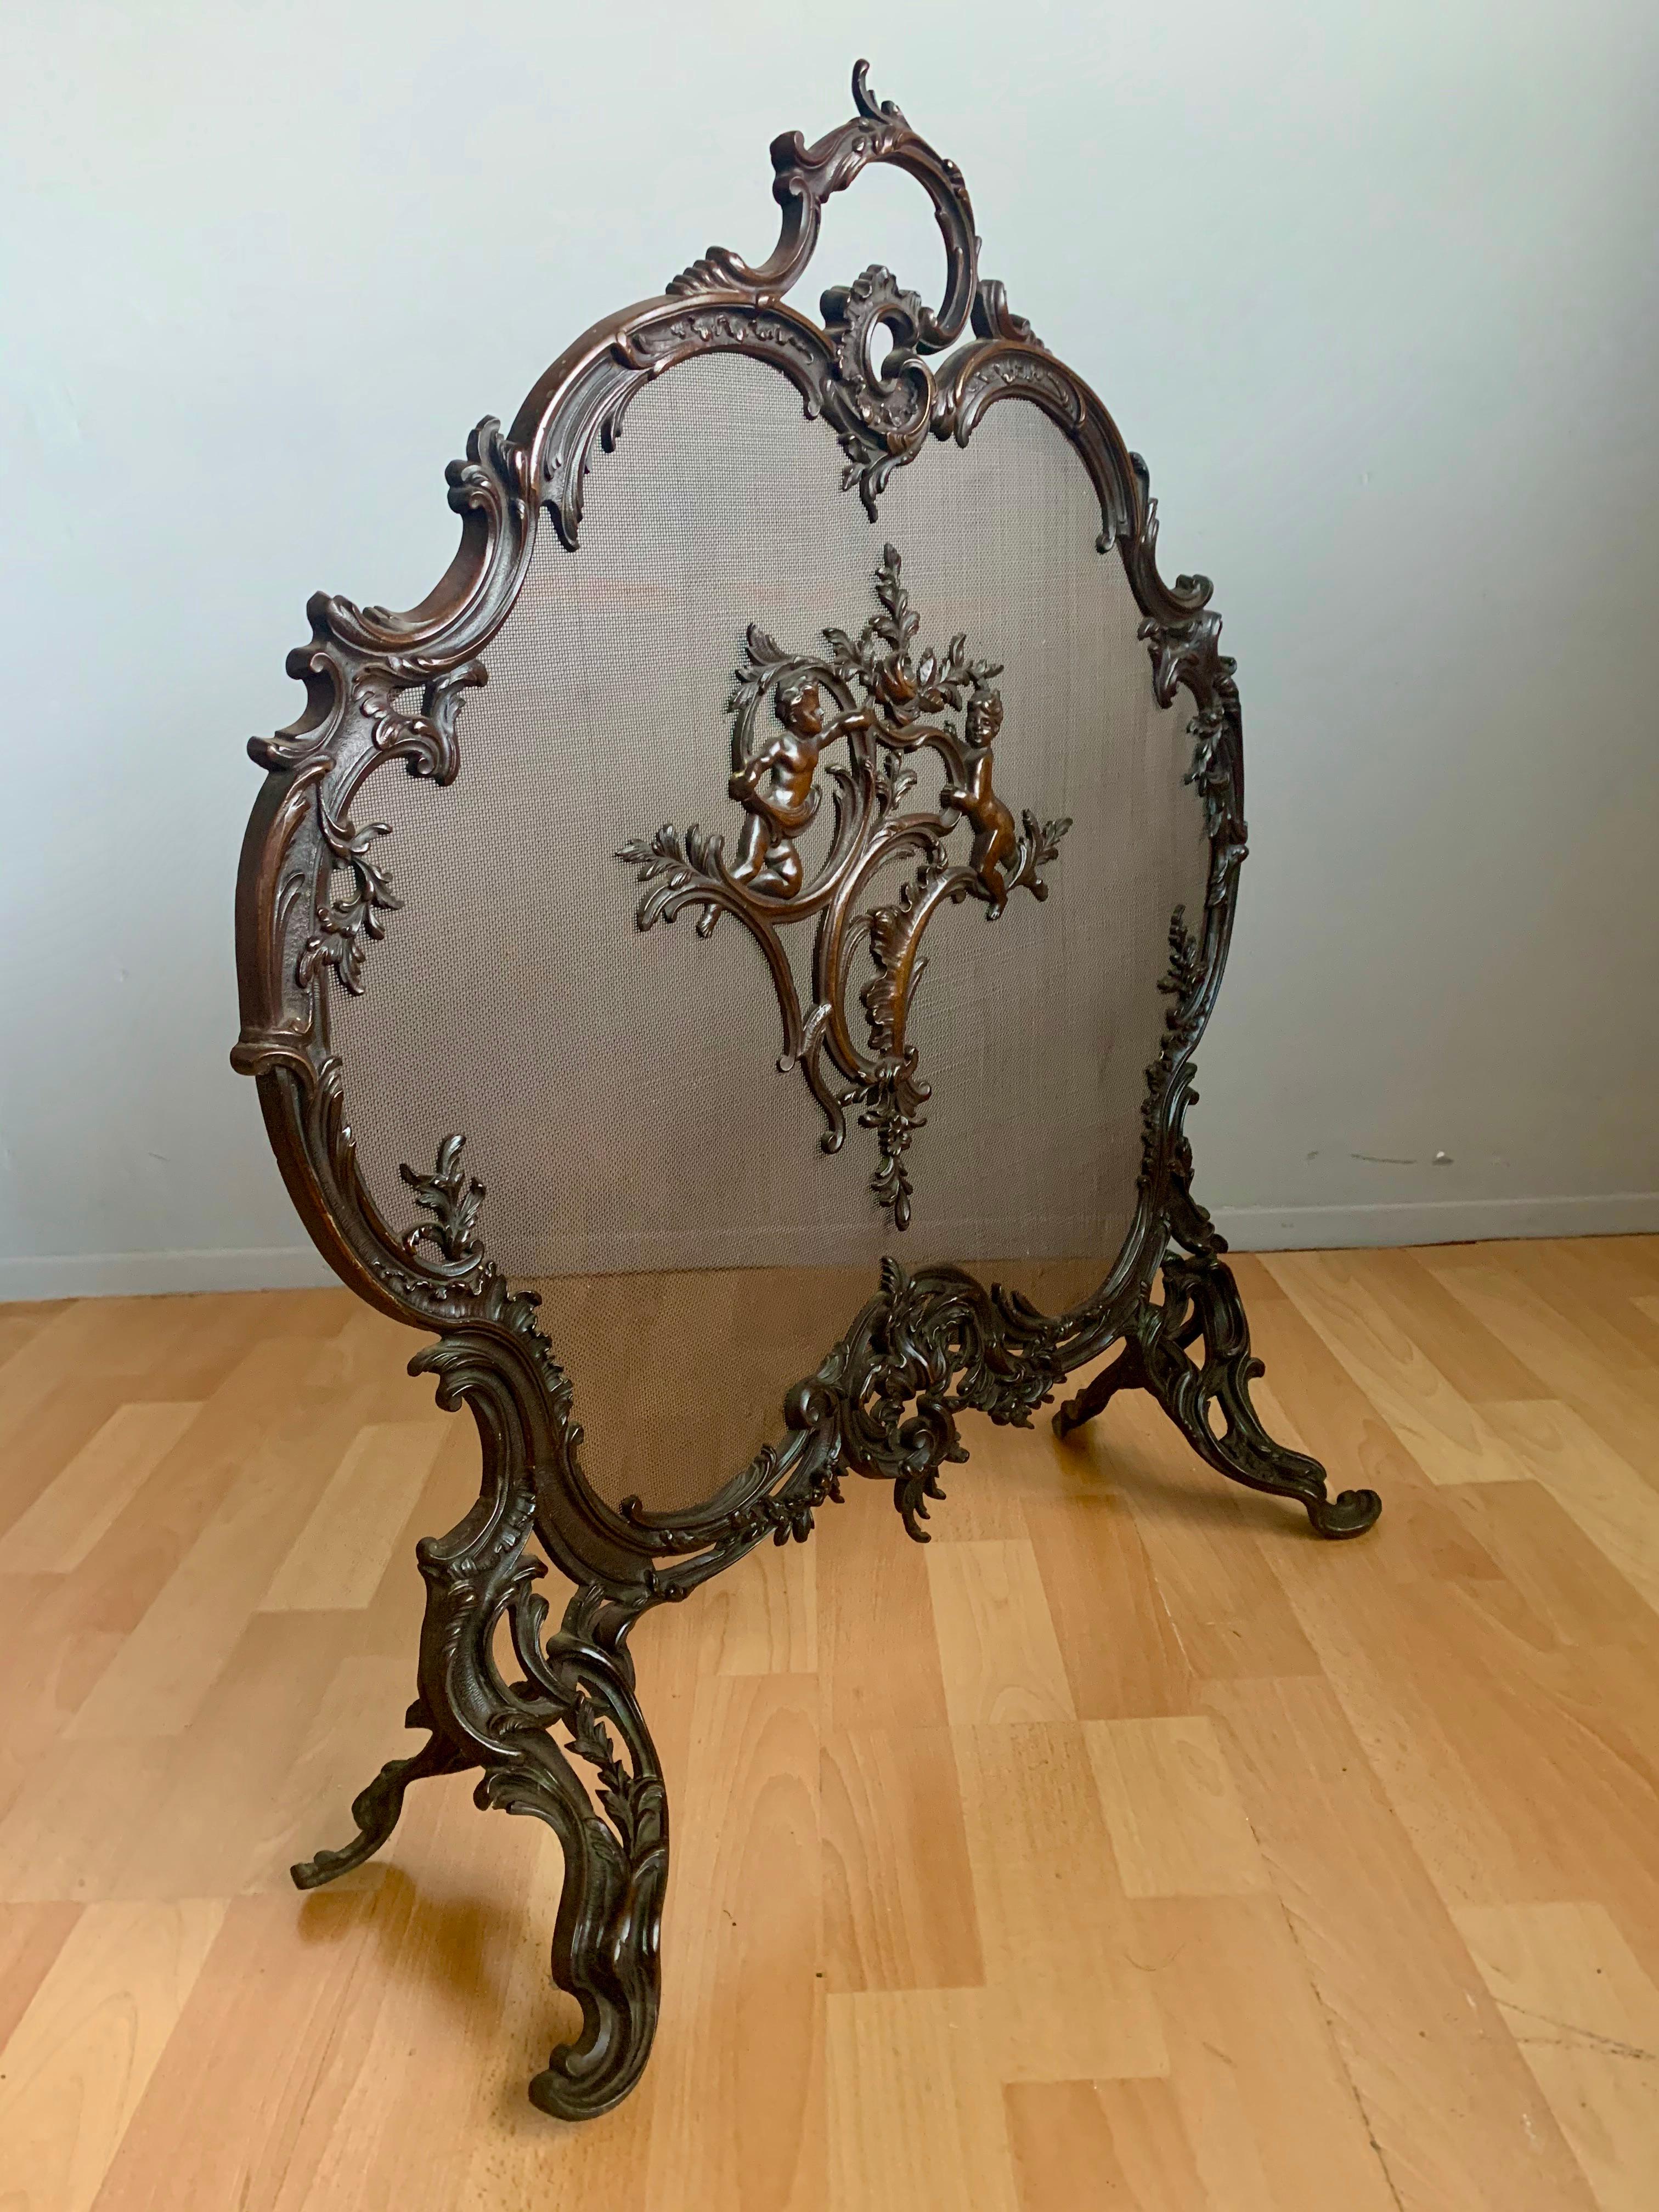 This antique French fire screen has amazing details and it is both marked and numbered.

If this beautifully handcrafted, 19th century fire screen is the right style to fit your fireplace and the size is correct for you as well then you could not